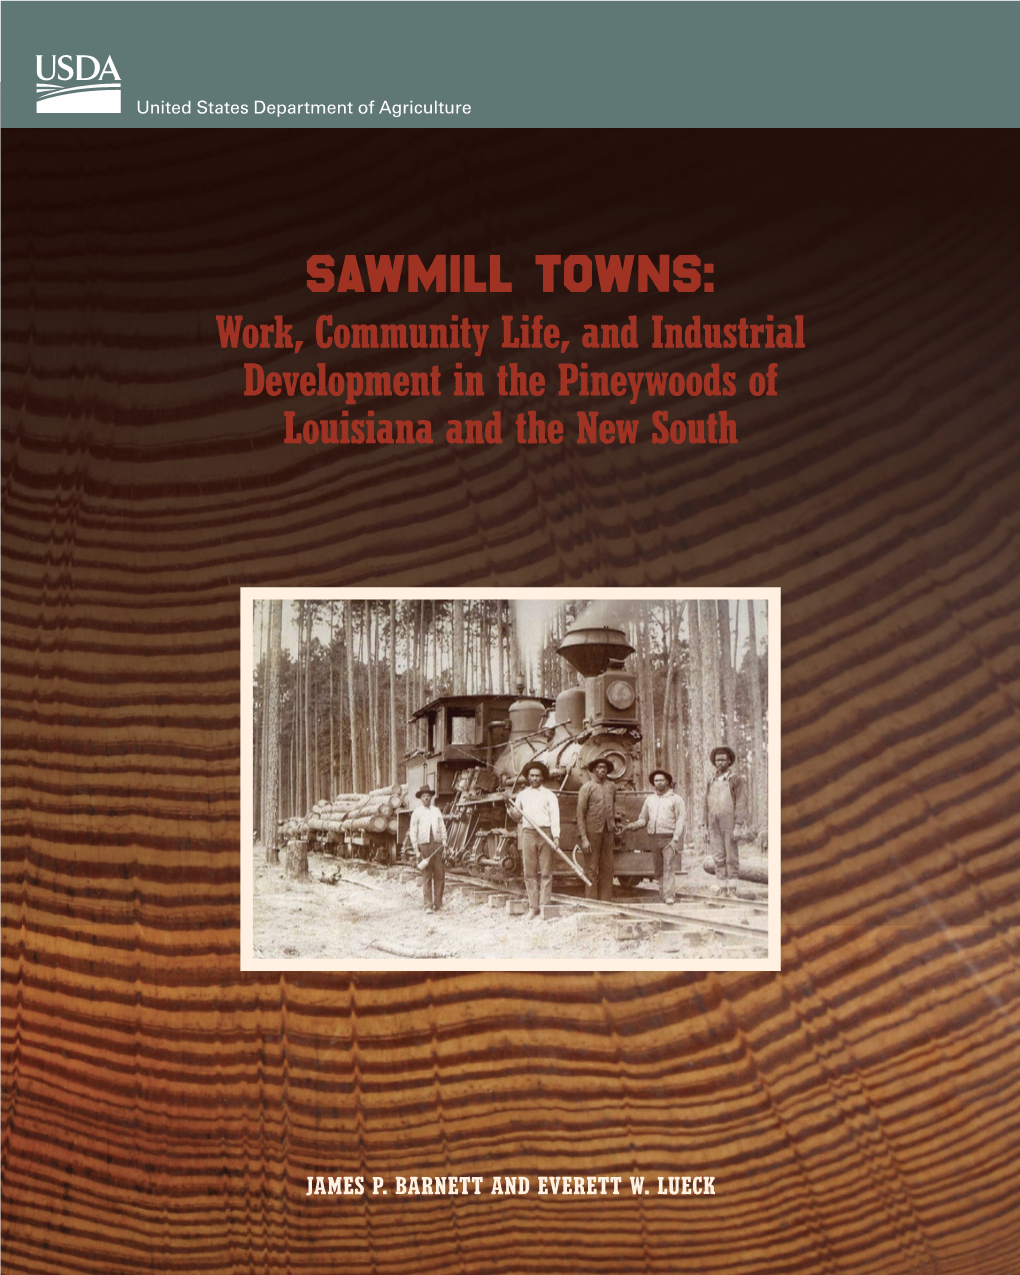 Sawmill Towns: Work, Community Life, and Industrial Development in the Pineywoods of Louisiana and the New South